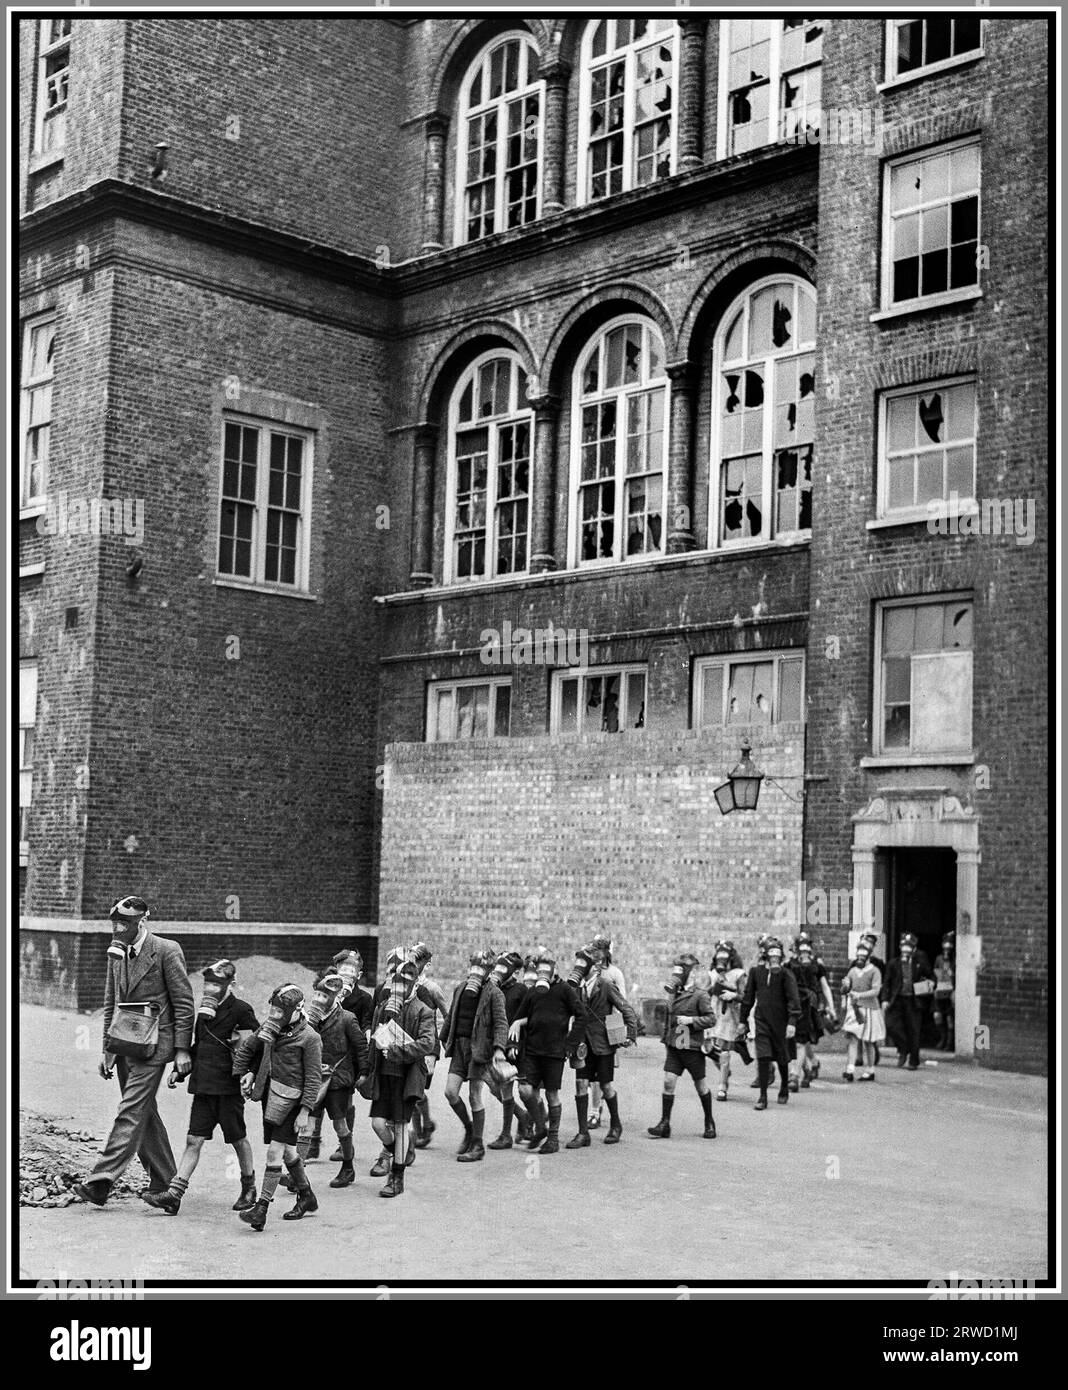 THE BLITZ LONDON WW2 Anti-gas drill at Old Woolwich Road School in Greenwich, London 1941. A school teacher wearing a gas mask leads group of school children out of the entrance of Old Woolwich Road School in Greenwich, London. The children are crossing playground, all are wearing their gas masks. The school has clearly been damaged by Nazi Germany blitz air raids, many windows have panes missing or smashed. 1941 London Blitz Battle of Britain World War II Stock Photo